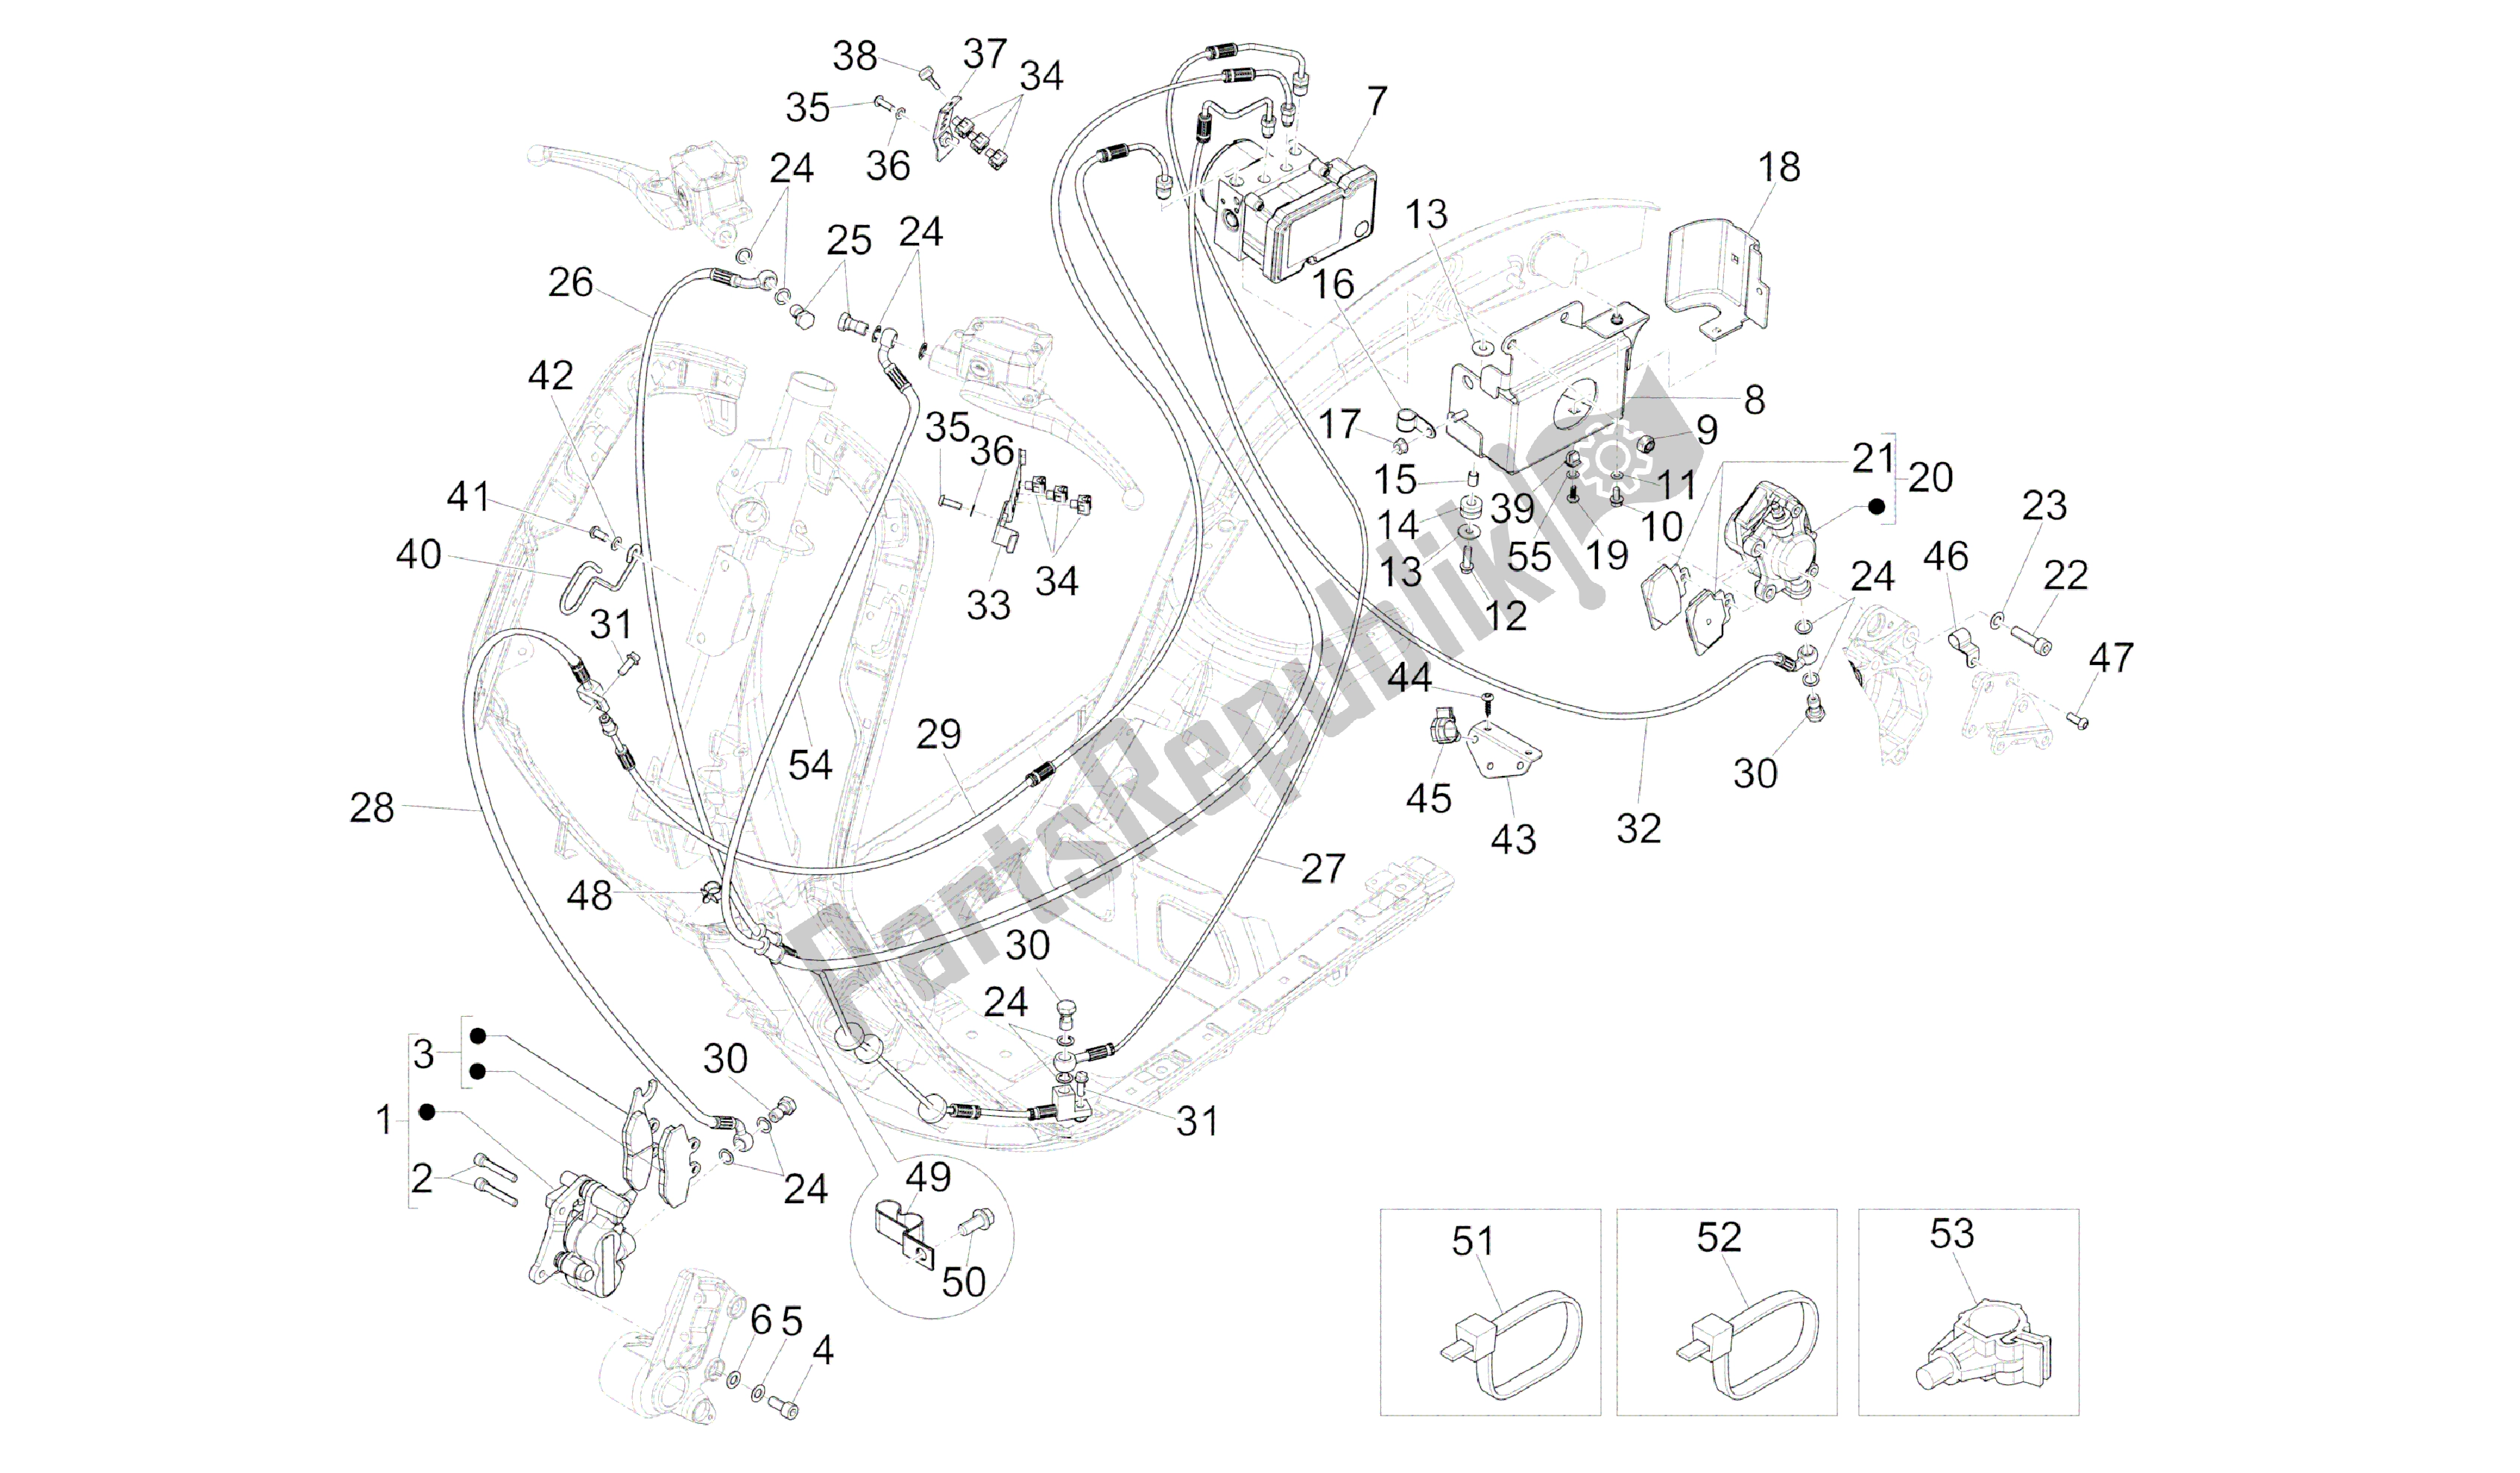 All parts for the Brakes Pipes - Calipers (abs) of the Vespa 946 150 2013 - 2014